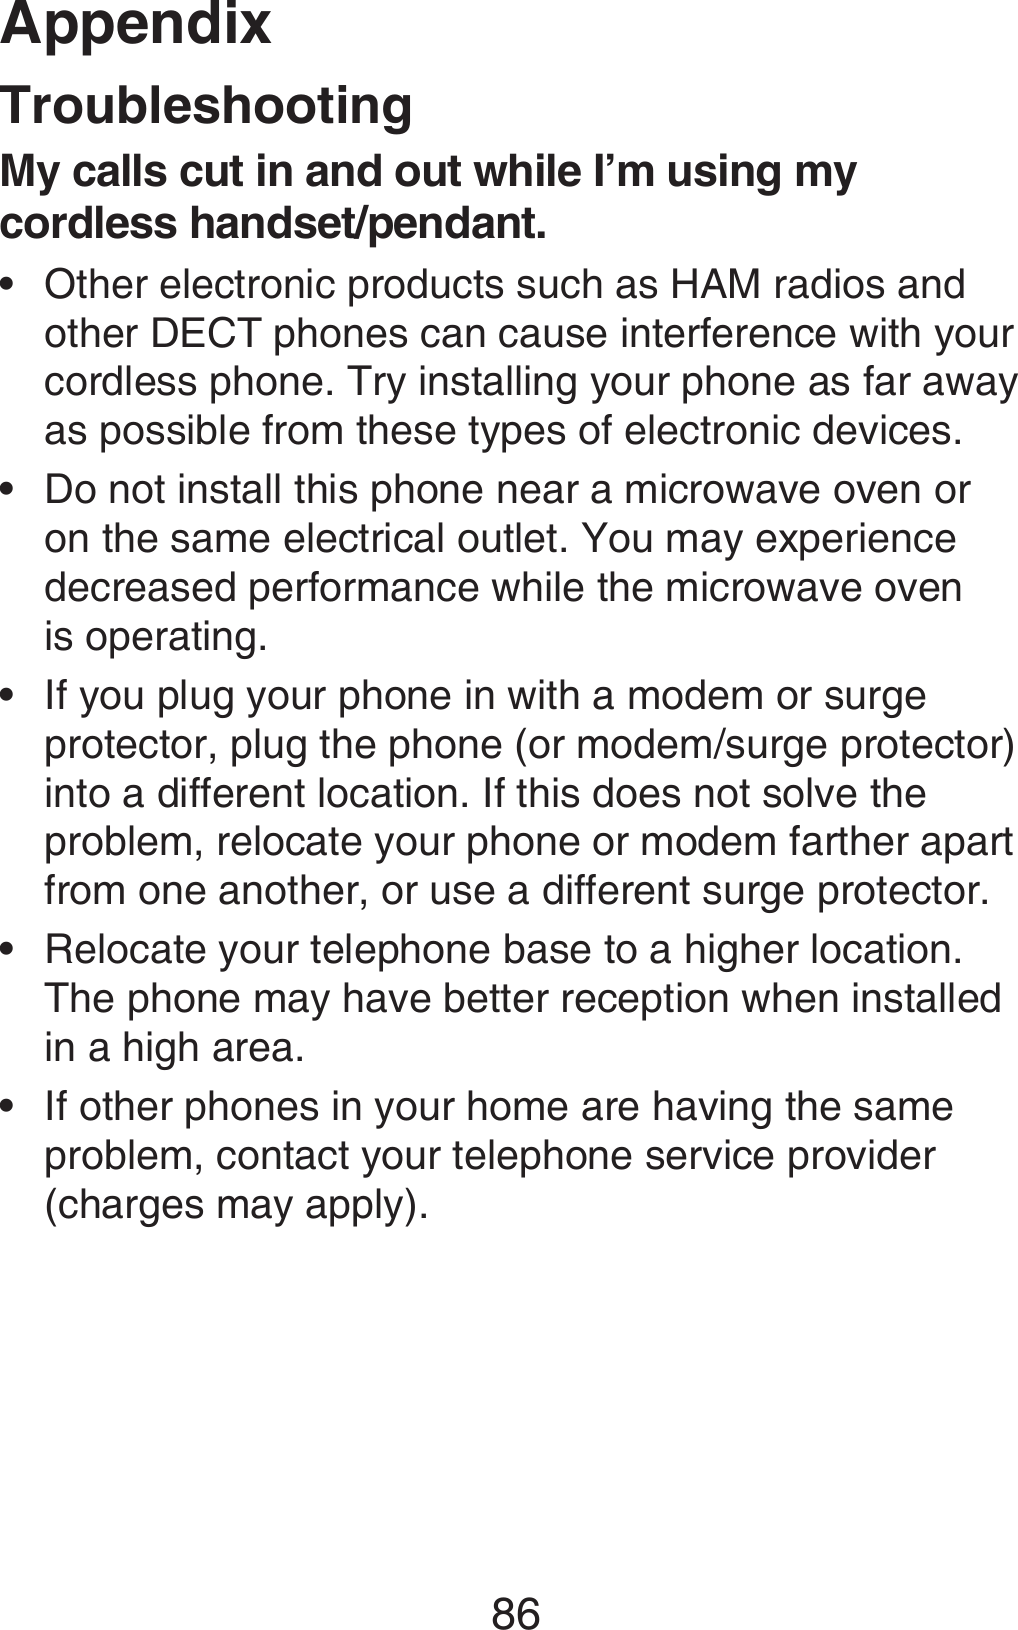 Appendix86TroubleshootingMy calls cut in and out while I’m using my cordless handset/pendant.Other electronic products such as HAM radios and other DECT phones can cause interference with your cordless phone. Try installing your phone as far away as possible from these types of electronic devices. Do not install this phone near a microwave oven or on the same electrical outlet. You may experience decreased performance while the microwave oven  is operating.If you plug your phone in with a modem or surge protector, plug the phone (or modem/surge protector) into a different location. If this does not solve the problem, relocate your phone or modem farther apart from one another, or use a different surge protector.Relocate your telephone base to a higher location. The phone may have better reception when installed in a high area.If other phones in your home are having the same problem, contact your telephone service provider (charges may apply).•••••